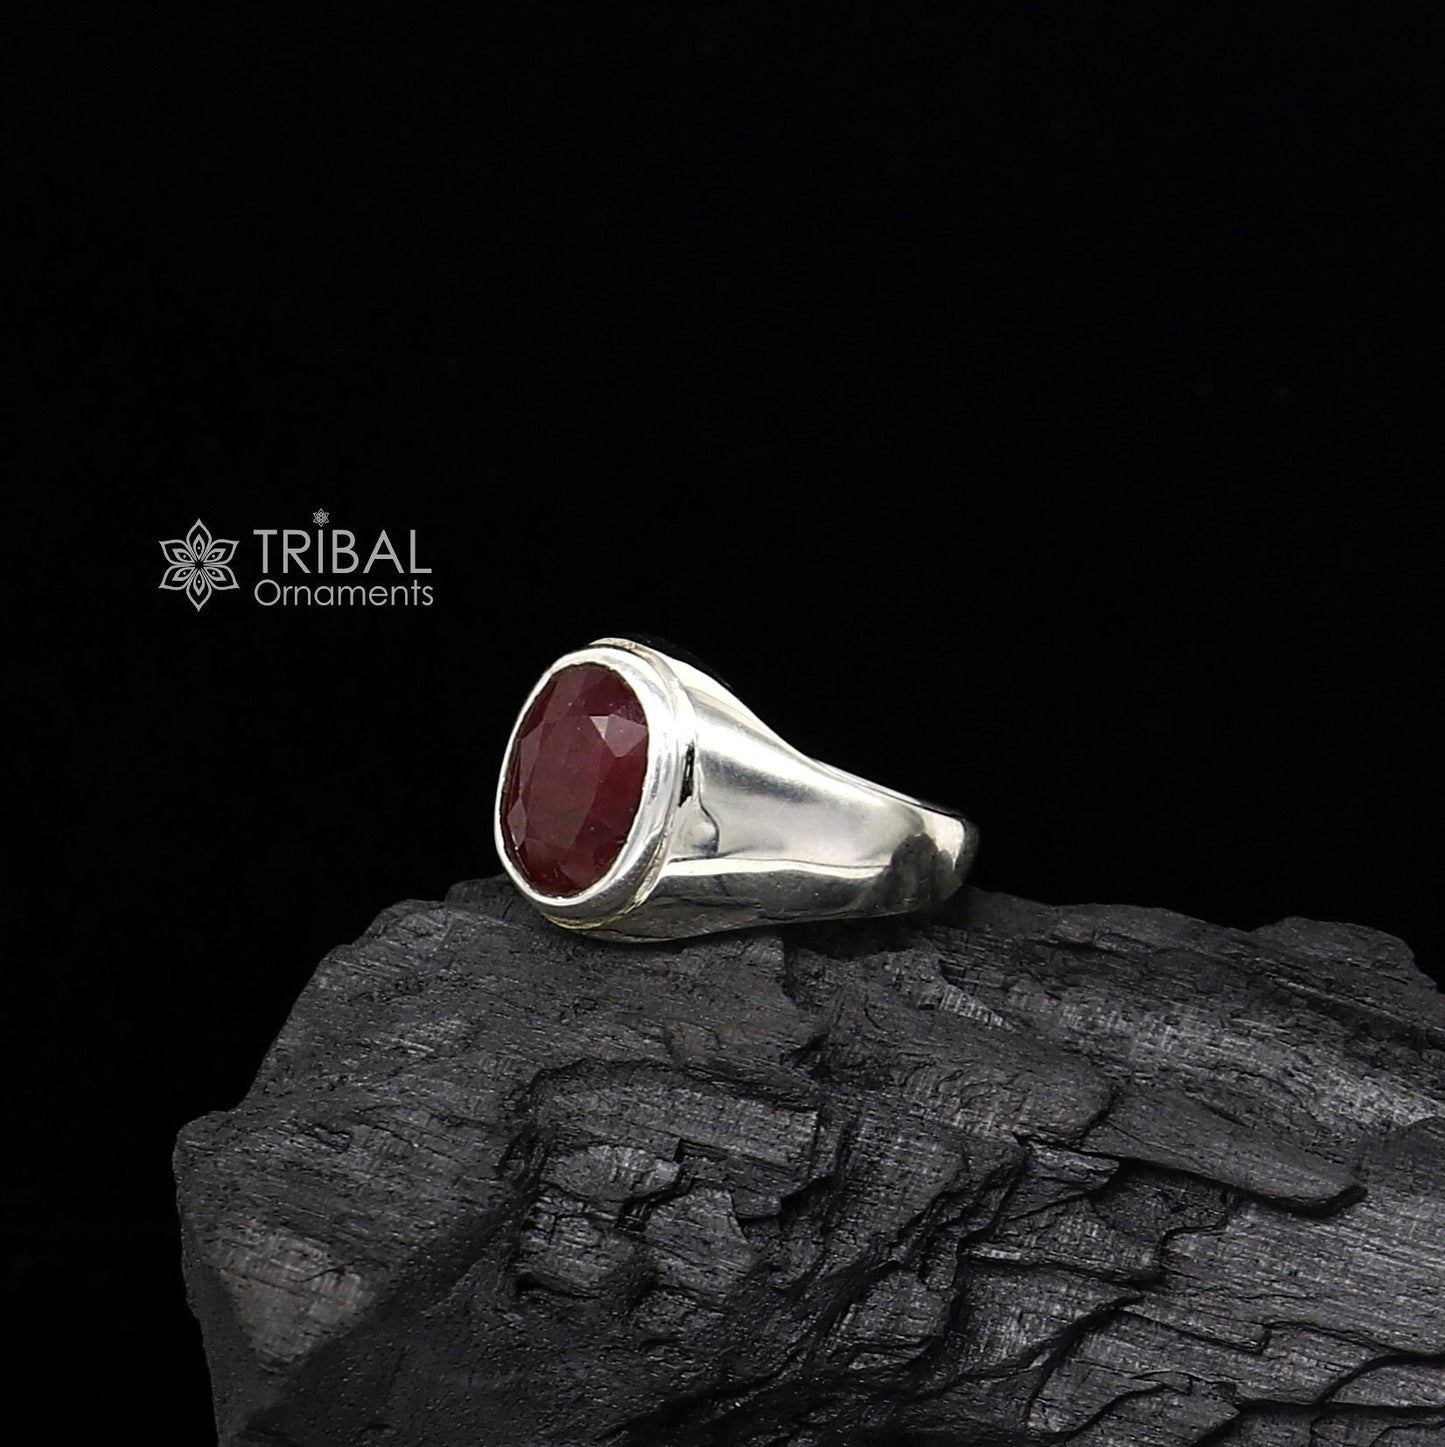 Authentic real 6 carat ruby (manak) stone 925 sterling silver handmade ring band for both men's and girl's, best Astro ring  sr378 - TRIBAL ORNAMENTS